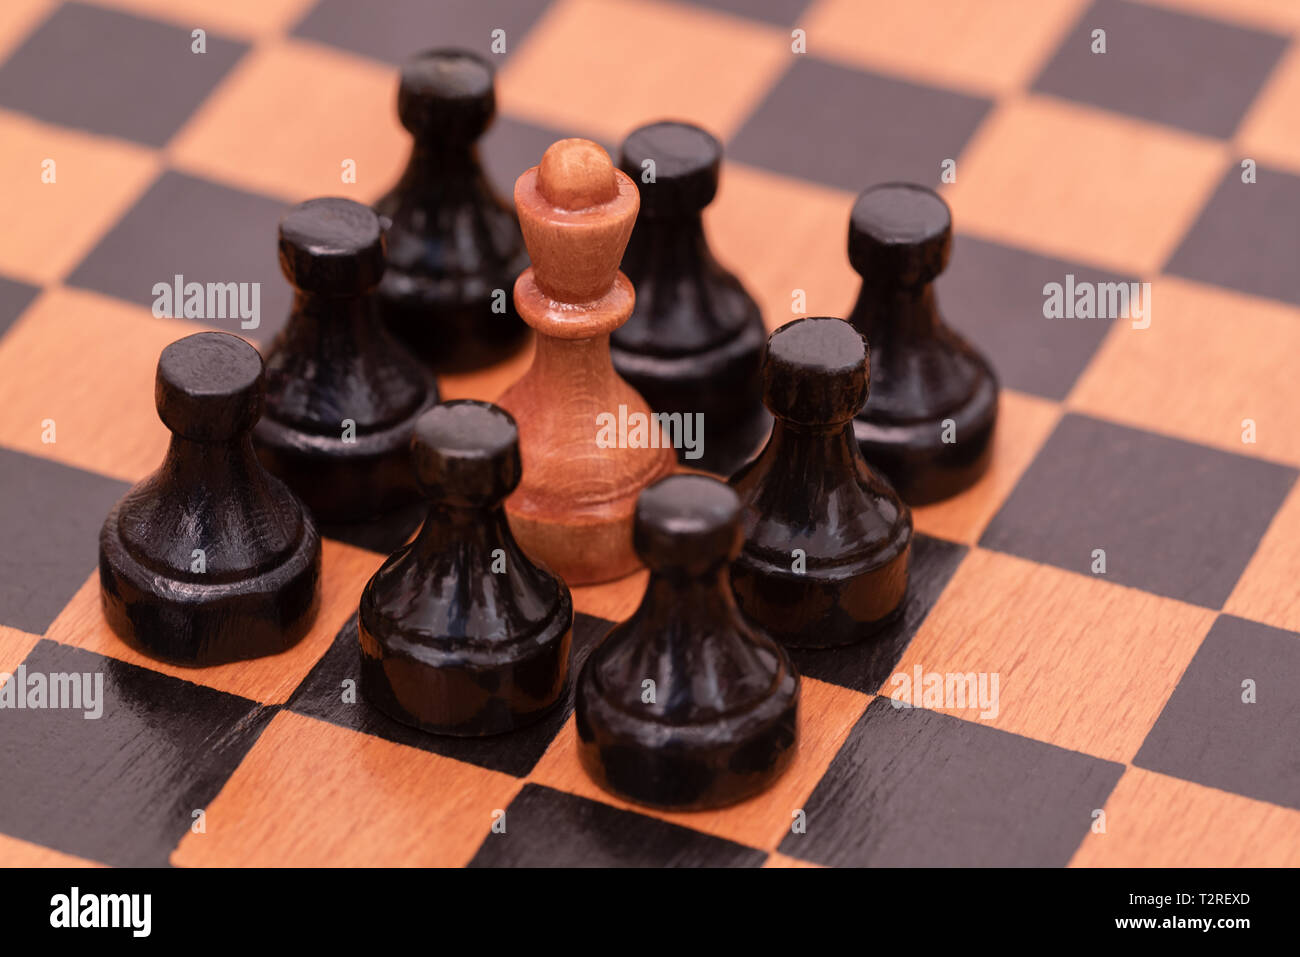 the king is surrounded by pawns Stock Photo